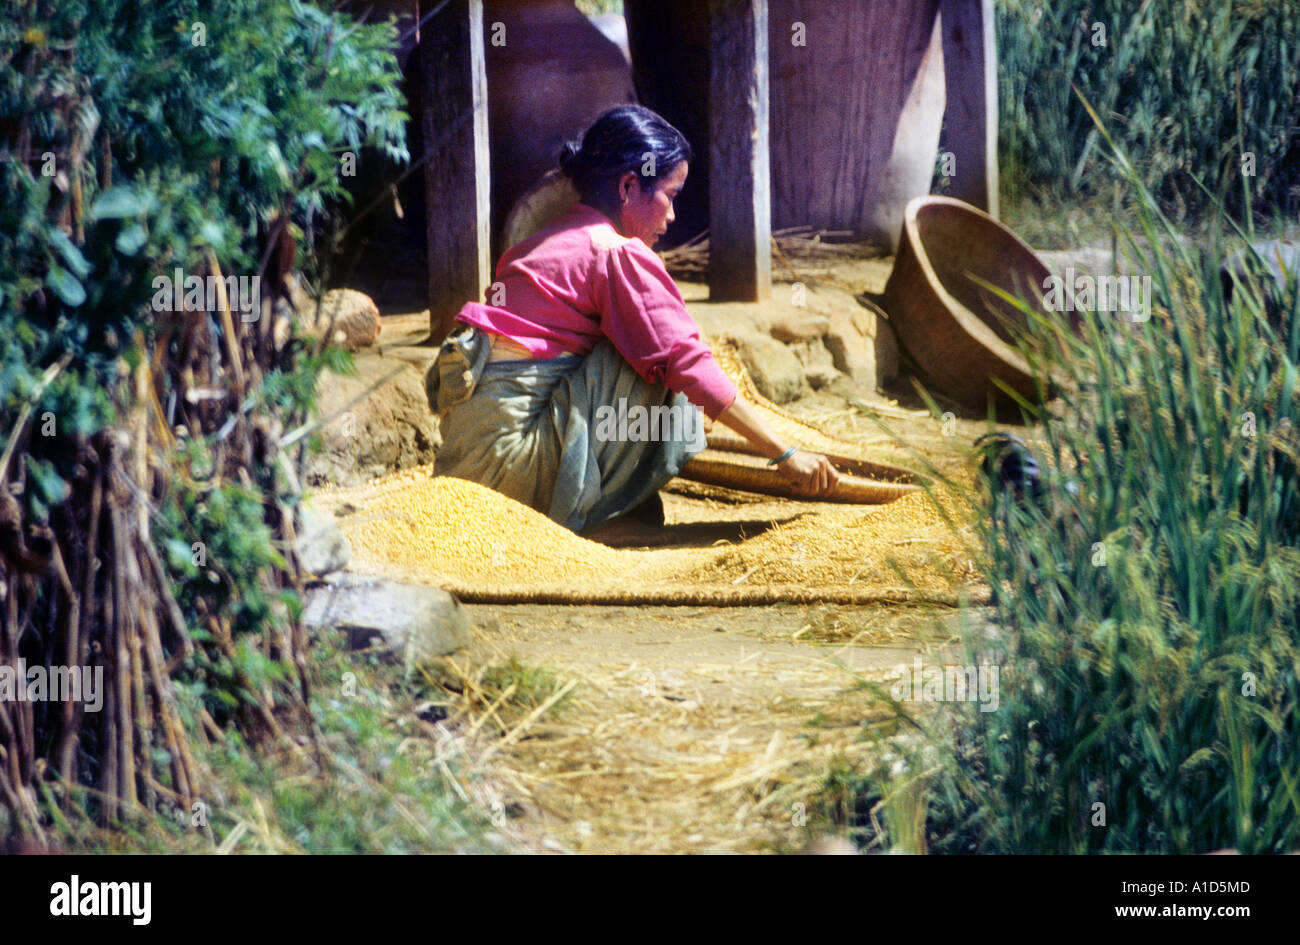 girl Nepal Asia candid unposed winnowing grain on mat harvest agriculture rural portrait rice wheat basket weave woven straw Stock Photo